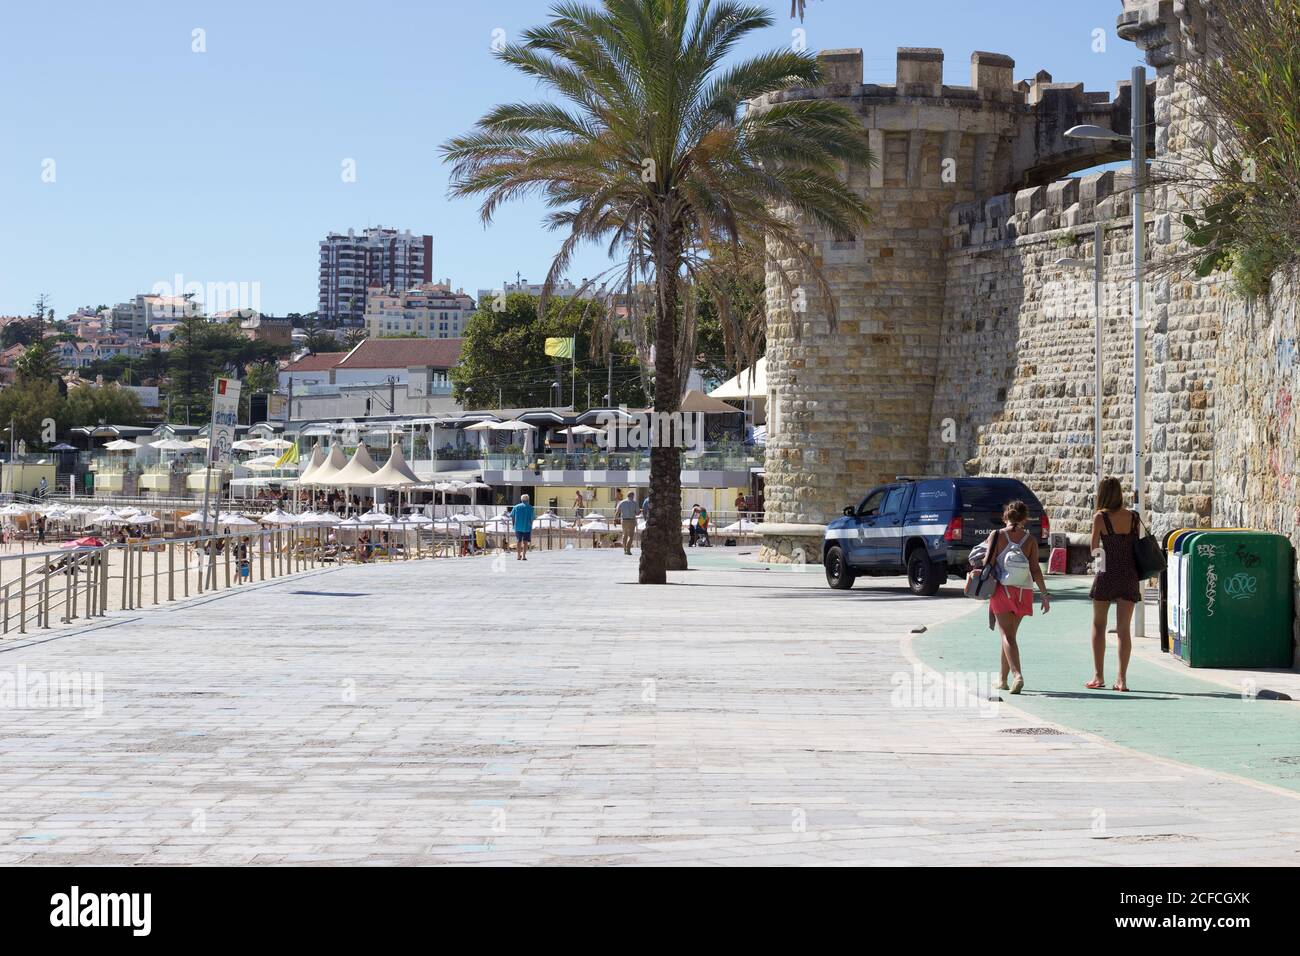 Estoril beach image featuring palm, castle and police patrol Stock Photo